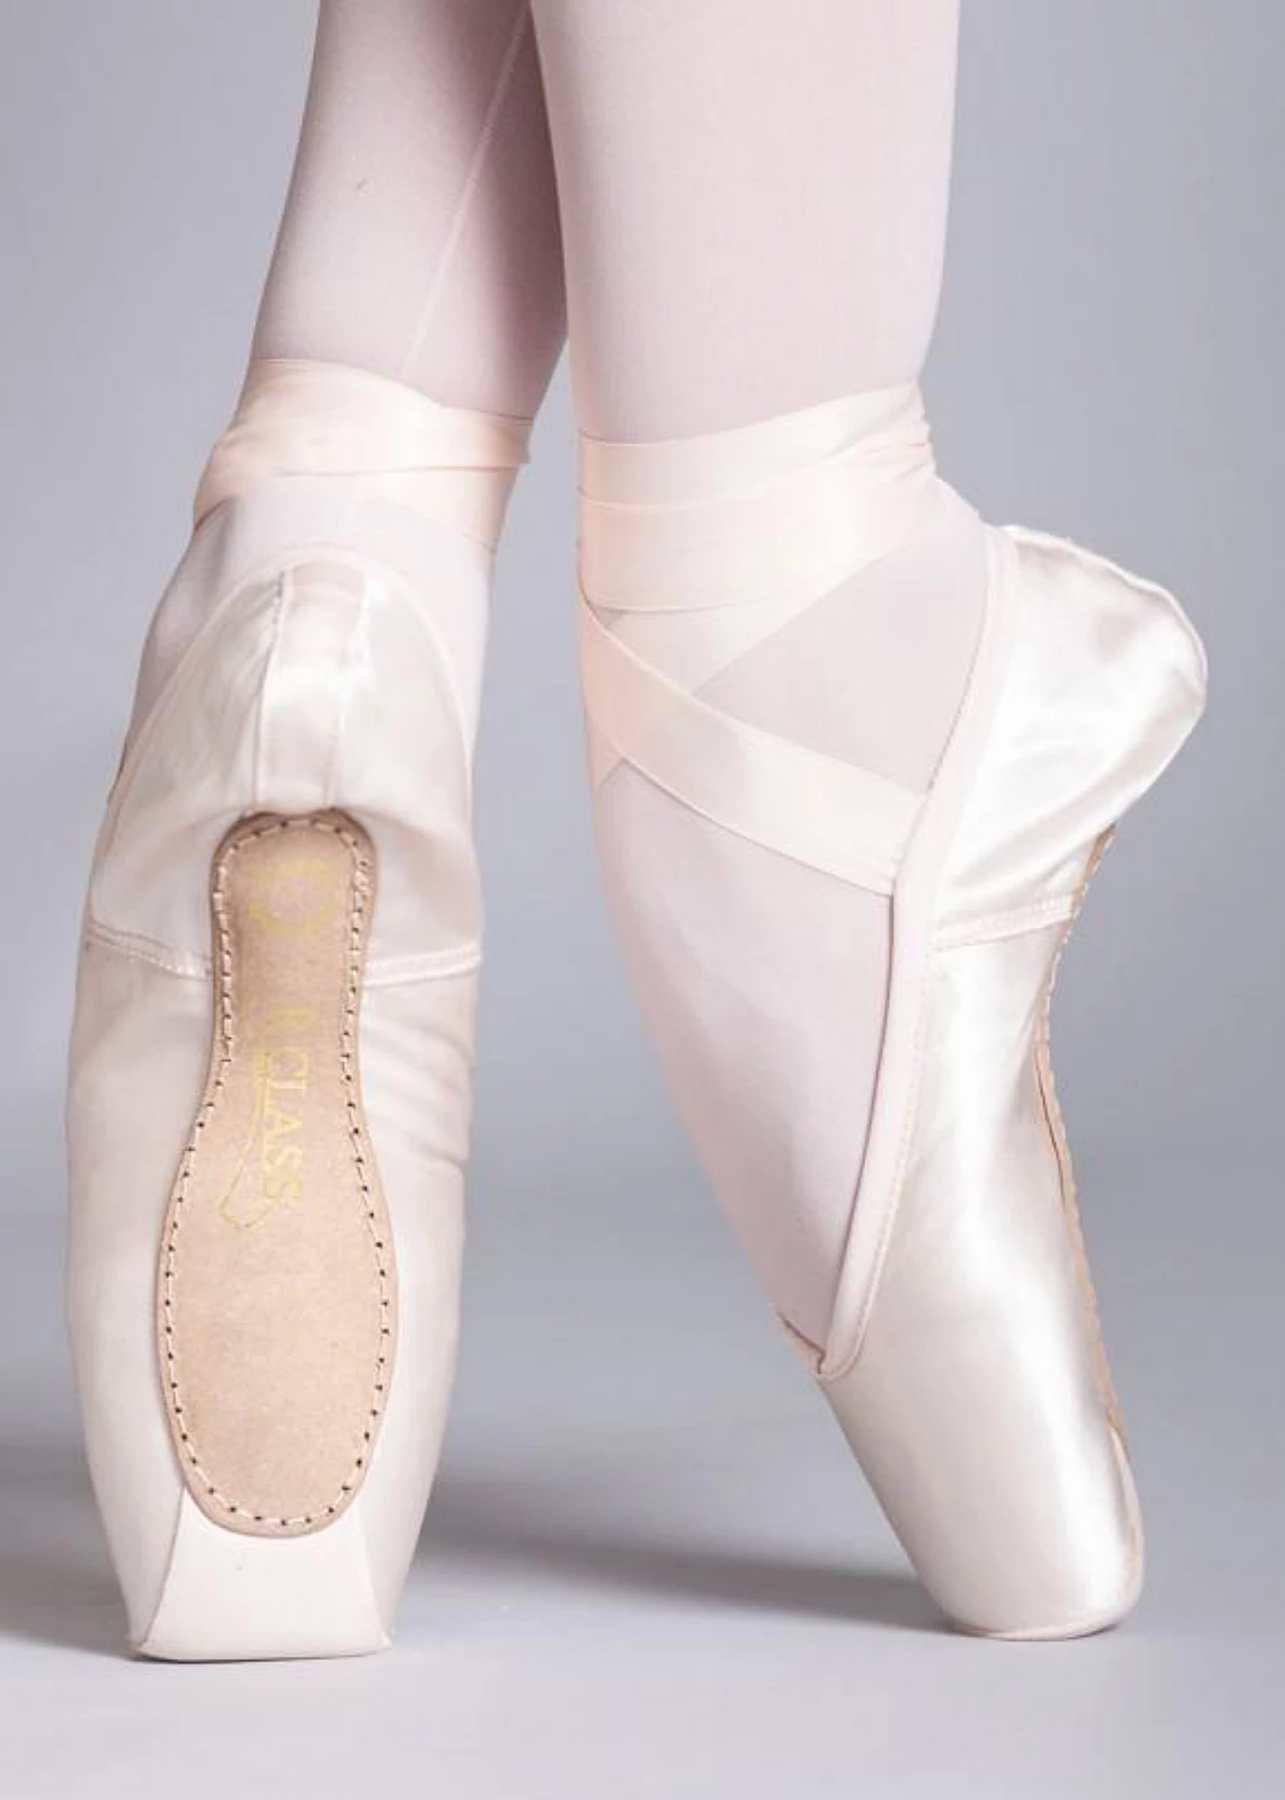 r class pointe shoes